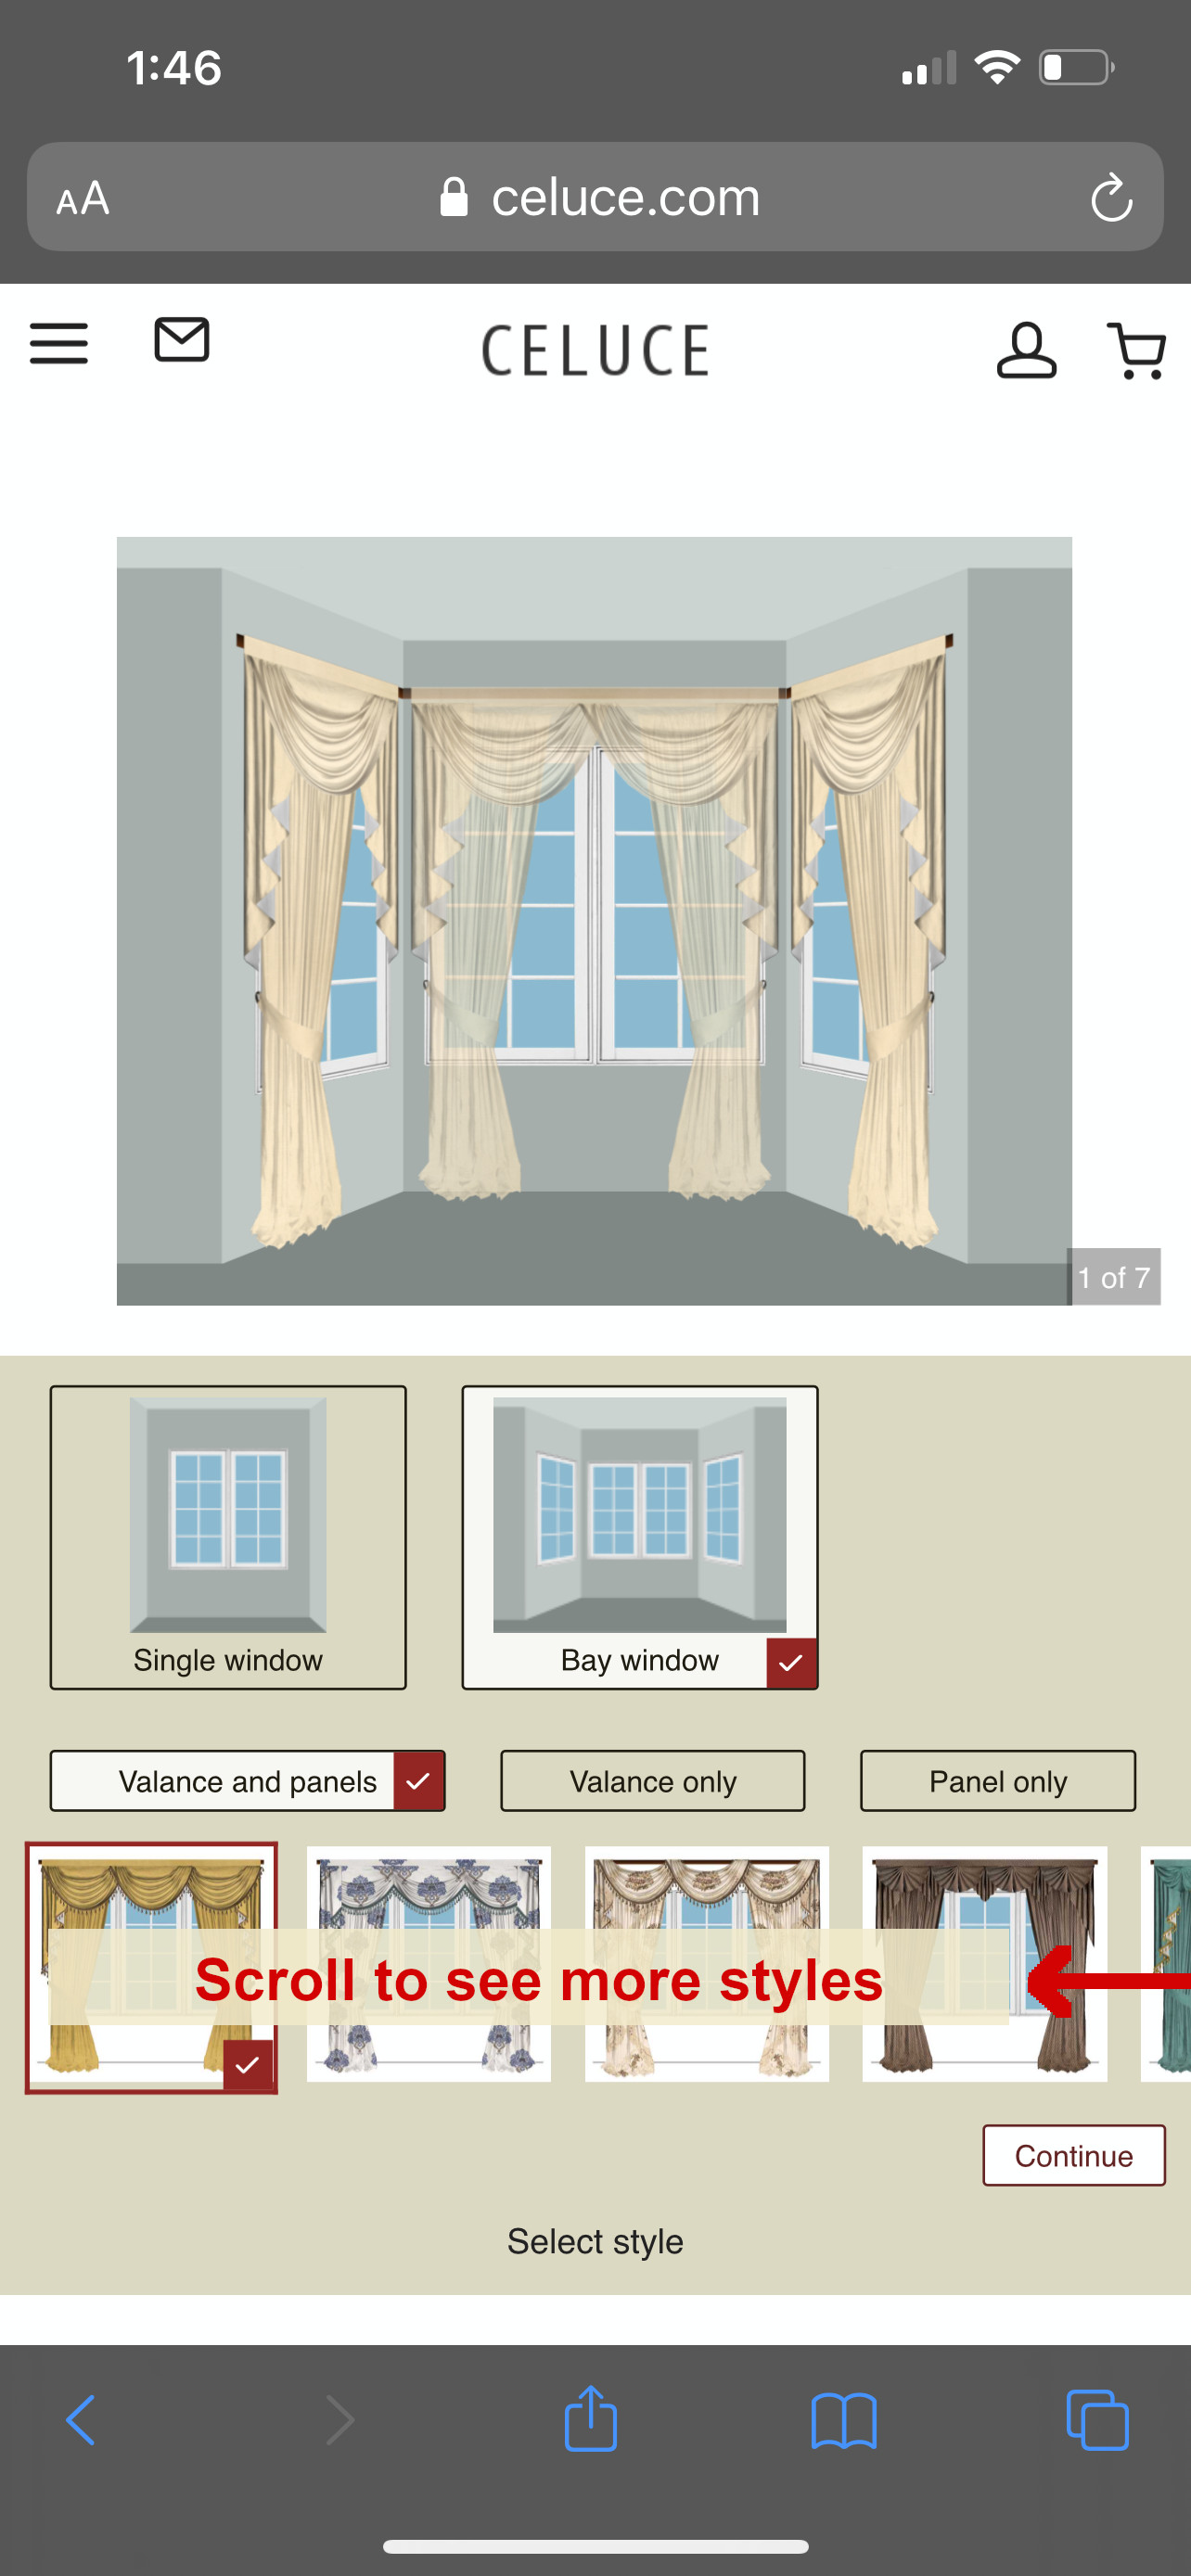 Select curtain styles